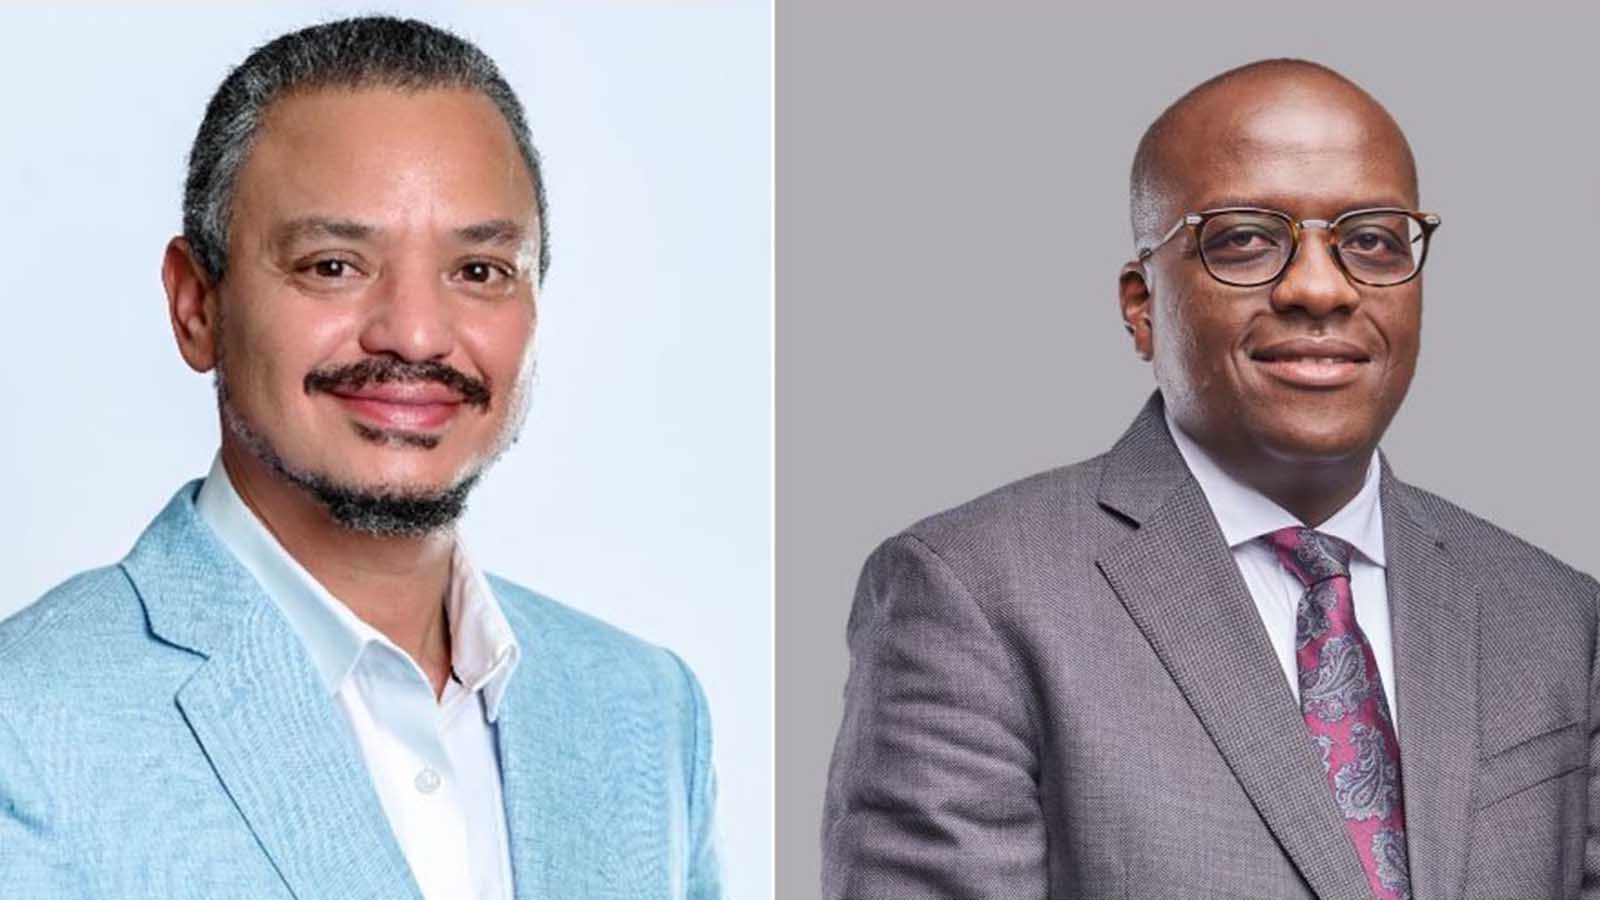 Tiger Brands appoints Polycarp Igathe as Chief Growth Officer-Rest of Africa, Zayd Abrahams as Chief Marketing and Strategy Officer